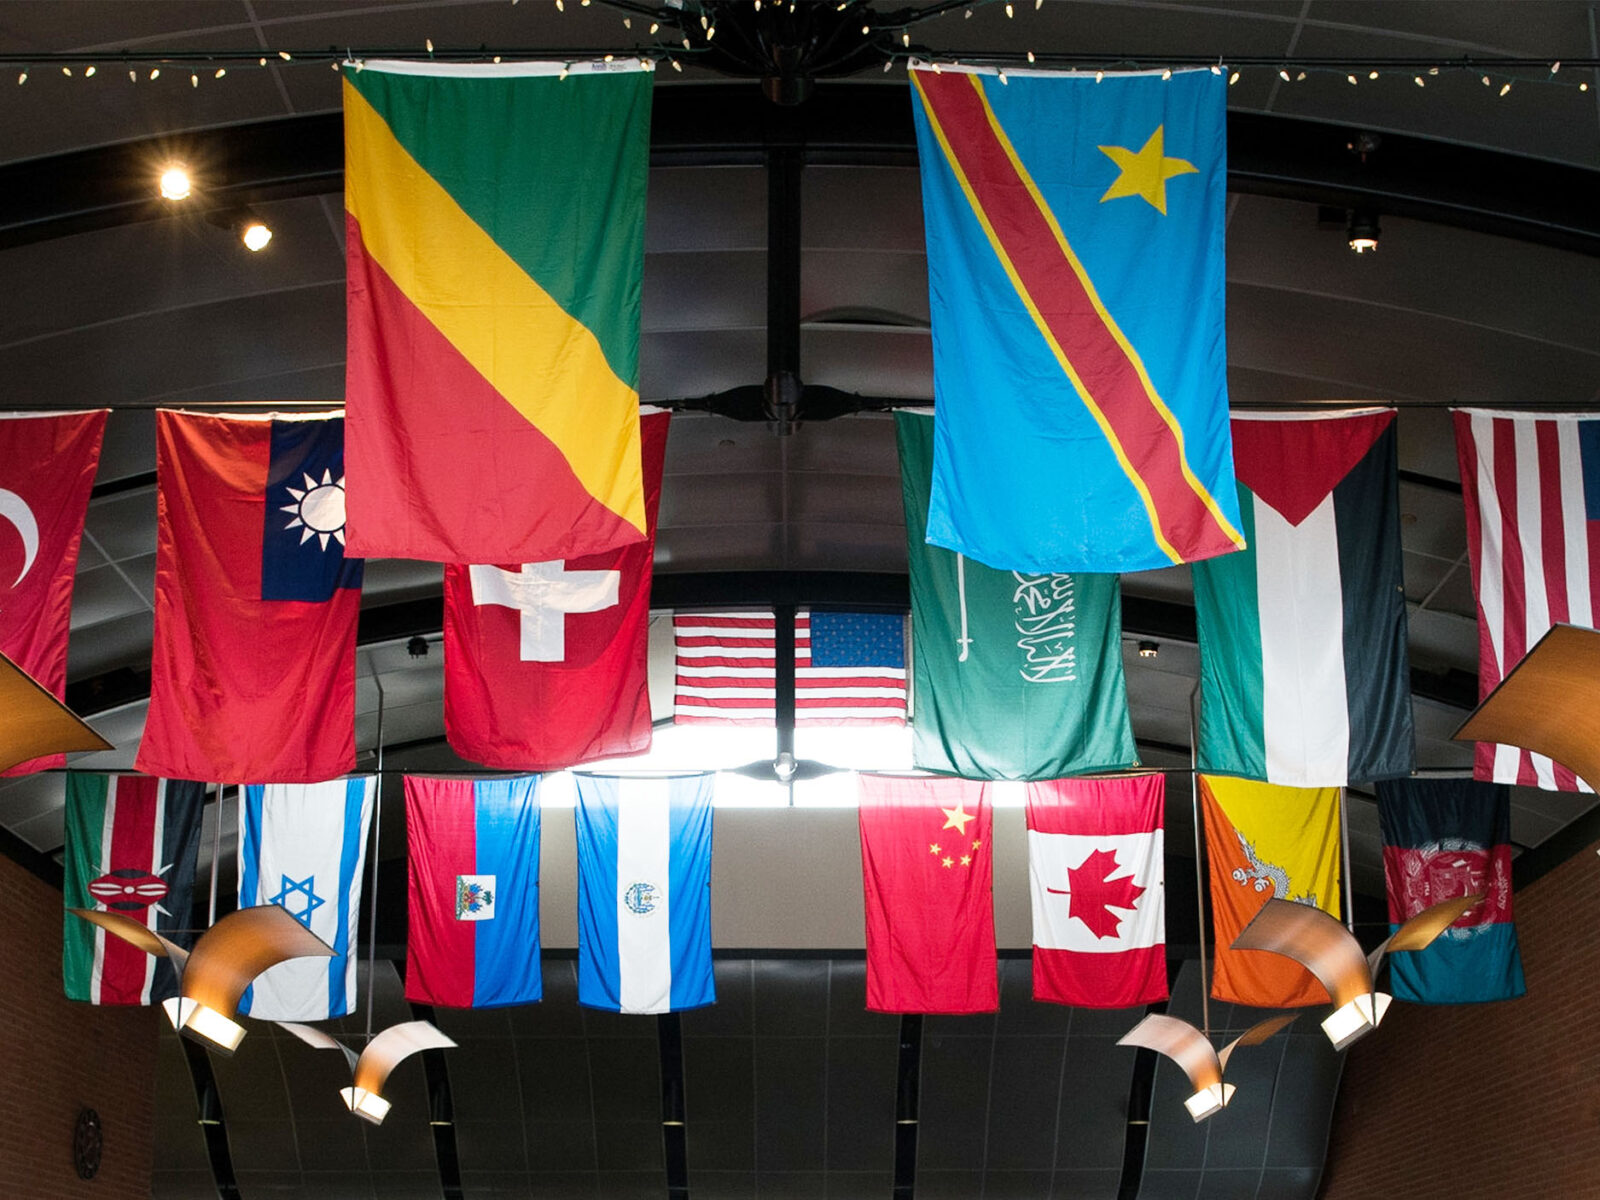 Flags from different countries hang from the ceiling in the IDX Dining Hall.